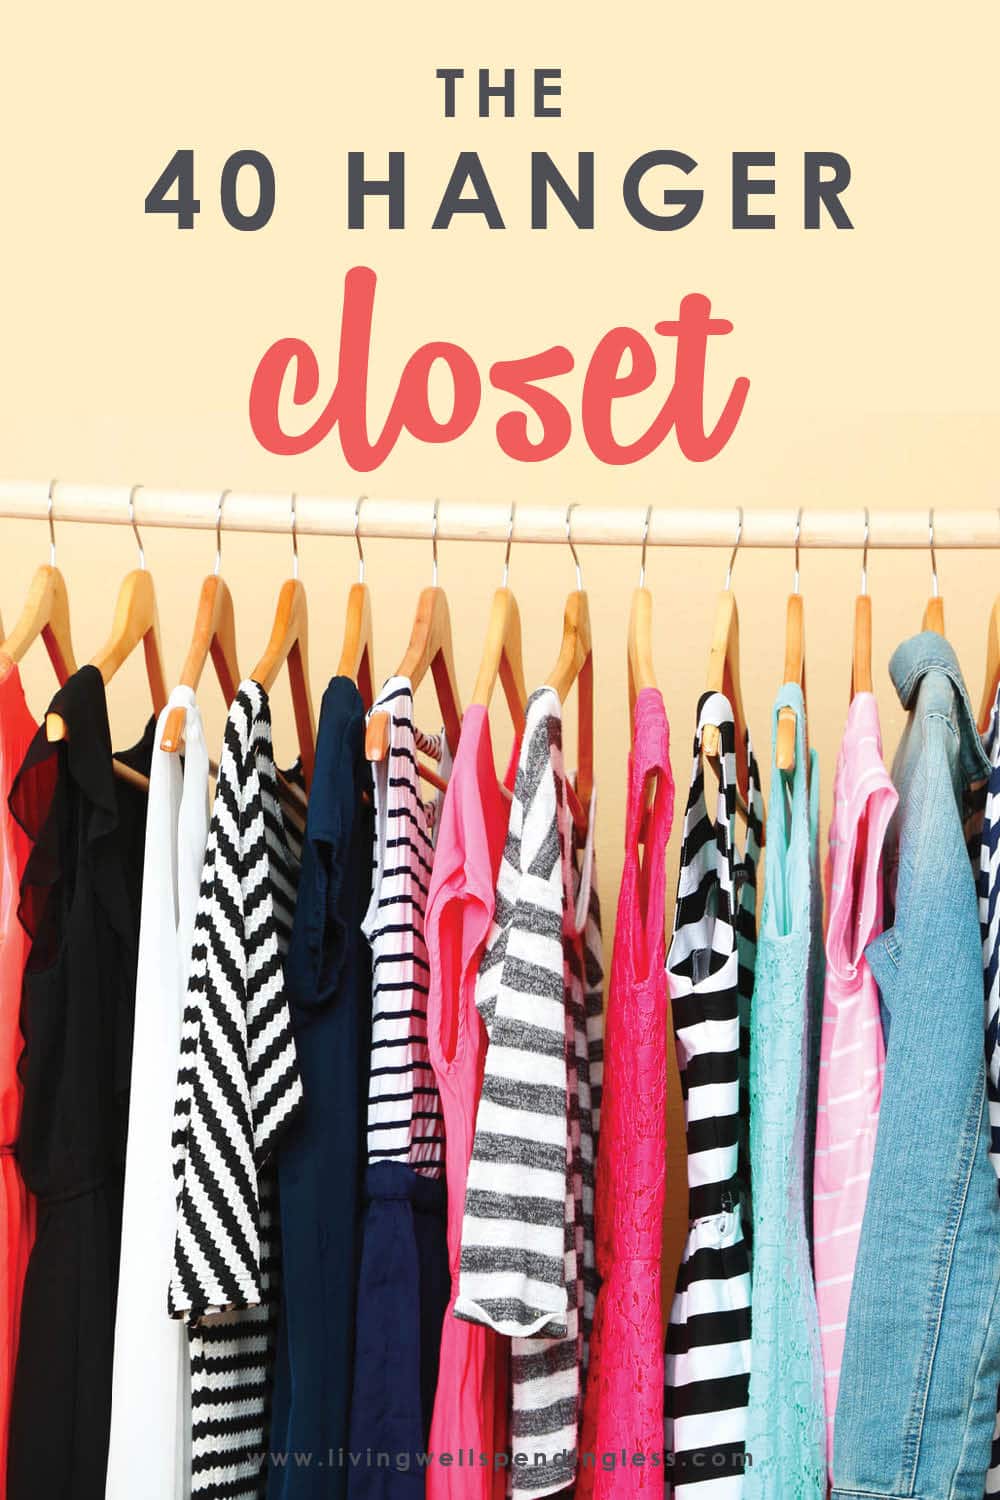 Are you sick of everything in your closet? Use the The 40 Hanger Closet organizing plan to pare down your wardrobe to the perfect essentials. #40hangercloset #closetorganization #organization #decluttering #declutteringtips #tidyingup #mariekondo #clutterfree